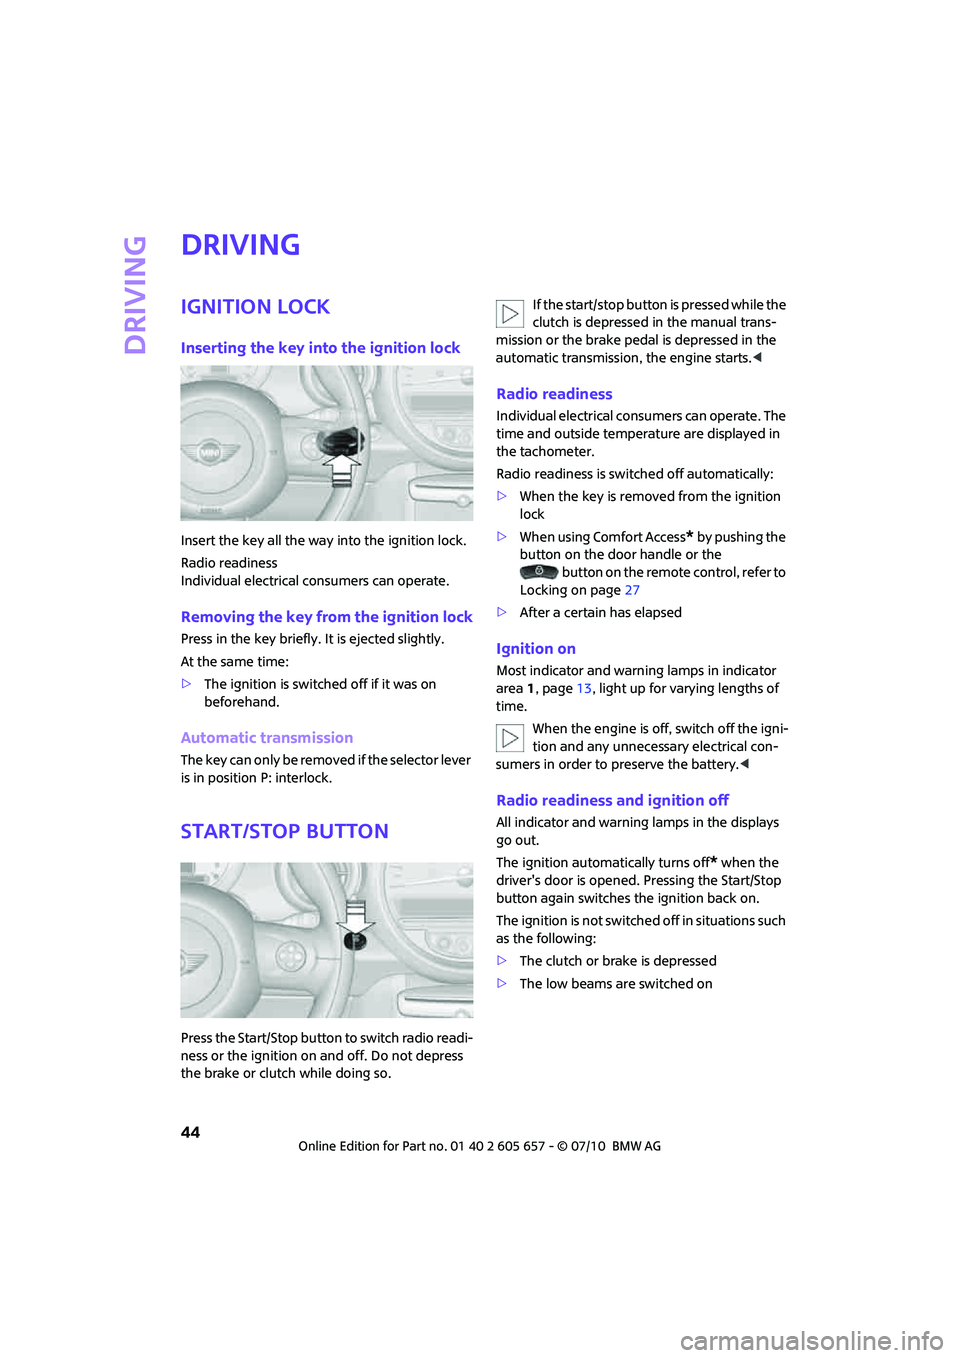 MINI COOPER CONVERTIBLE 2011  Owners Manual Driving
44
Driving
Ignition lock
Inserting the key into the ignition lock
Insert the key all the way into the ignition lock.
Radio readiness
Individual electrical consumers can operate.
Removing the k